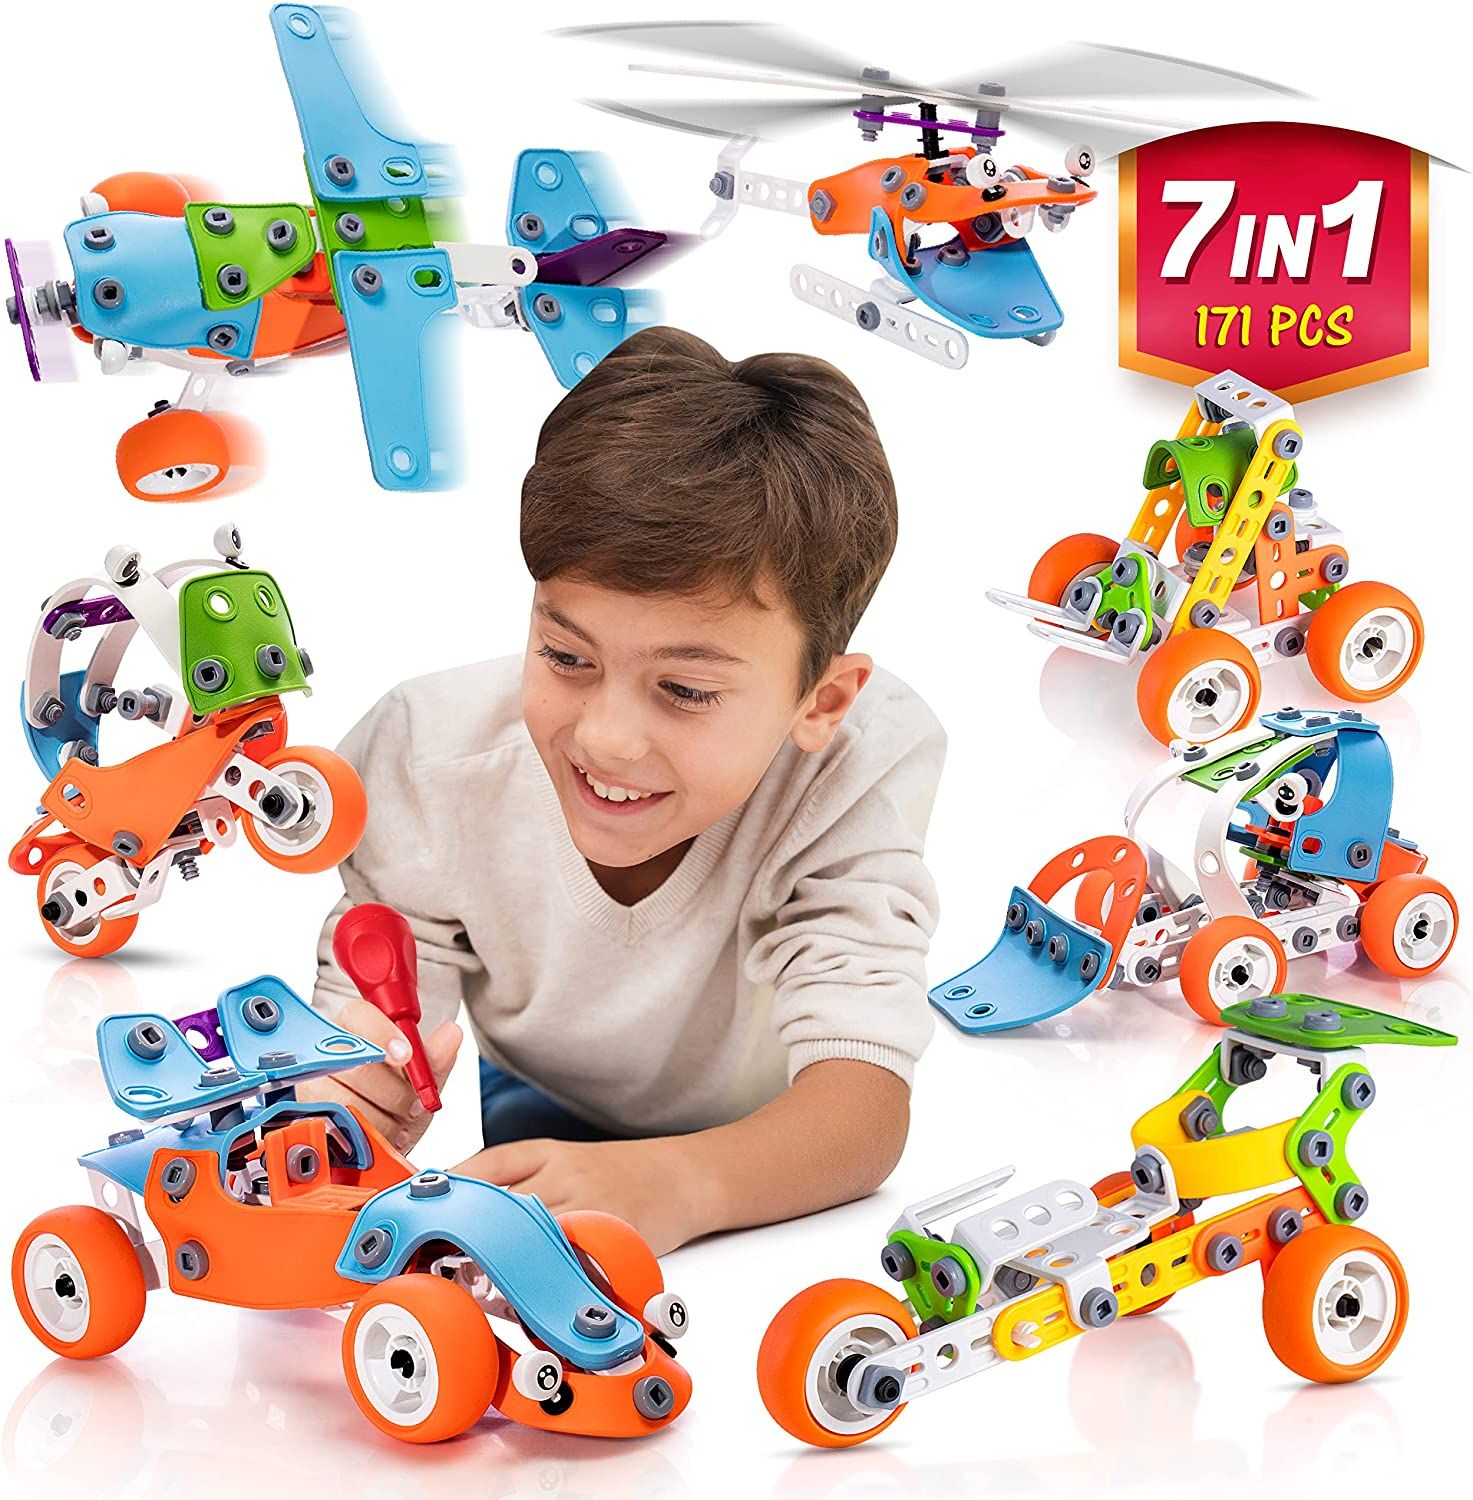 STEM-Building-Toys-for-7-12-Years-Old-1-1